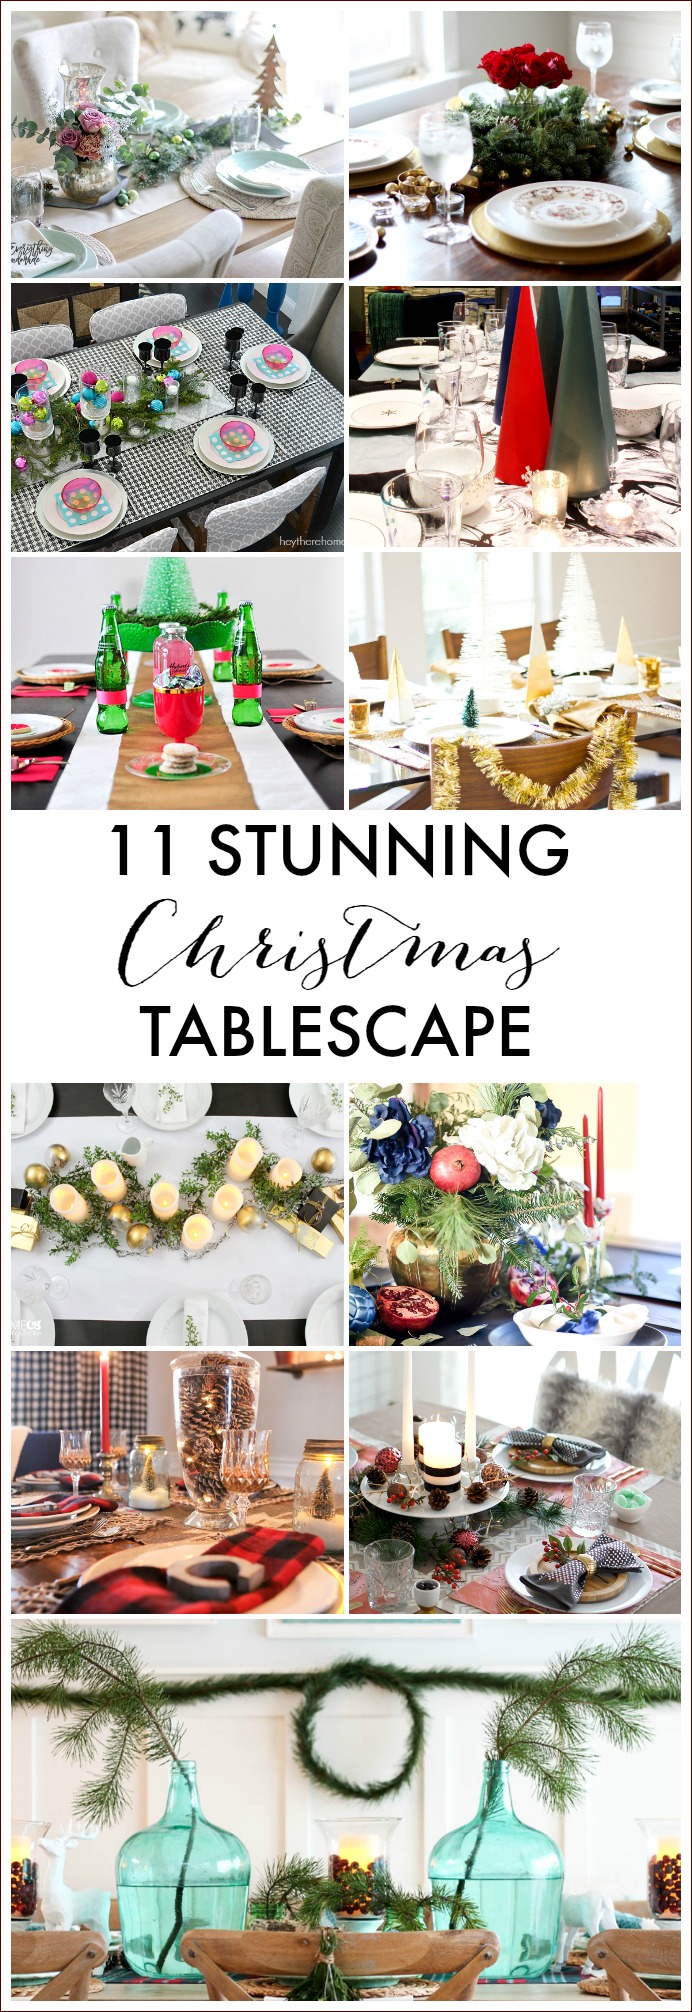 Check out these 11 Stunning Christmas Tablescapes to inspire your holiday table decor. 